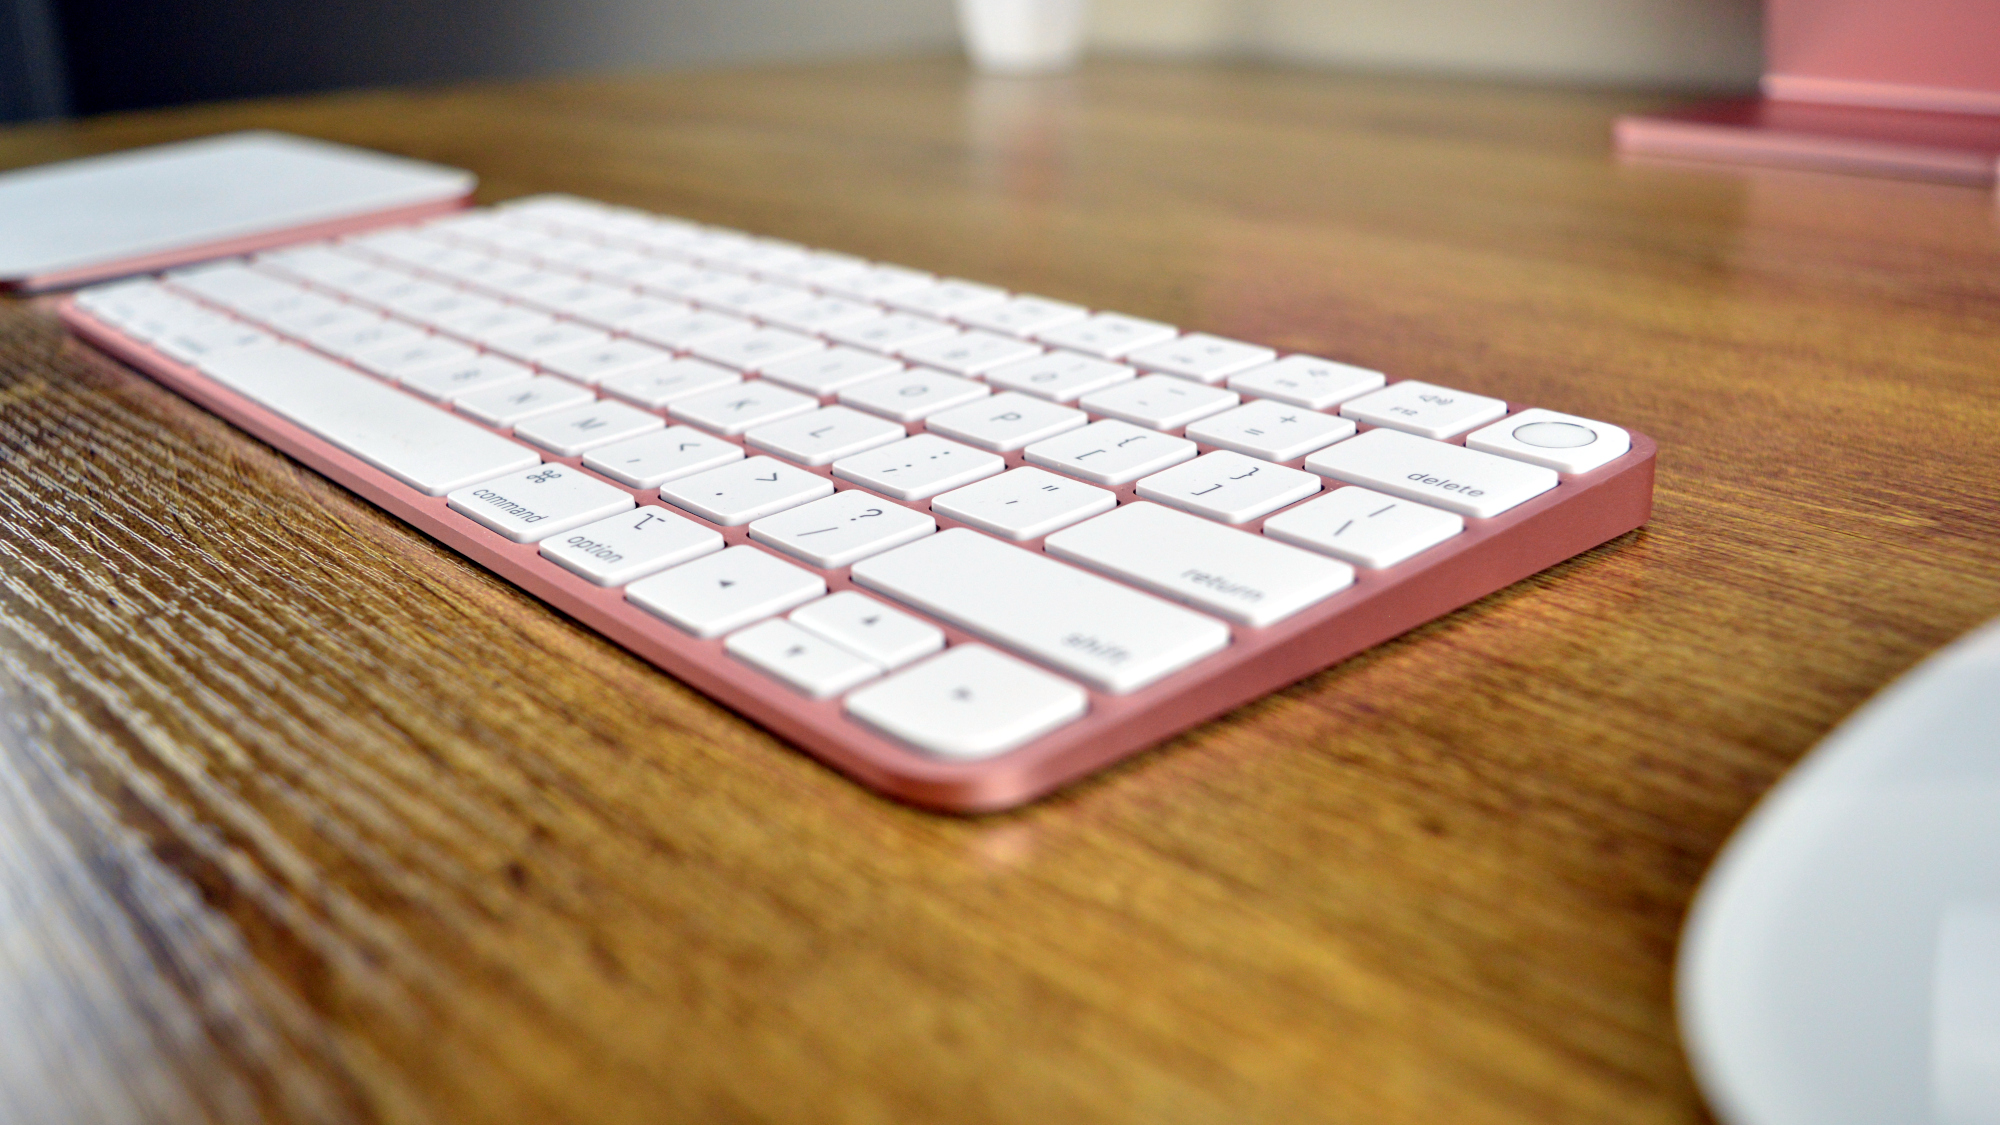 best wireless keyboard for mac at good price